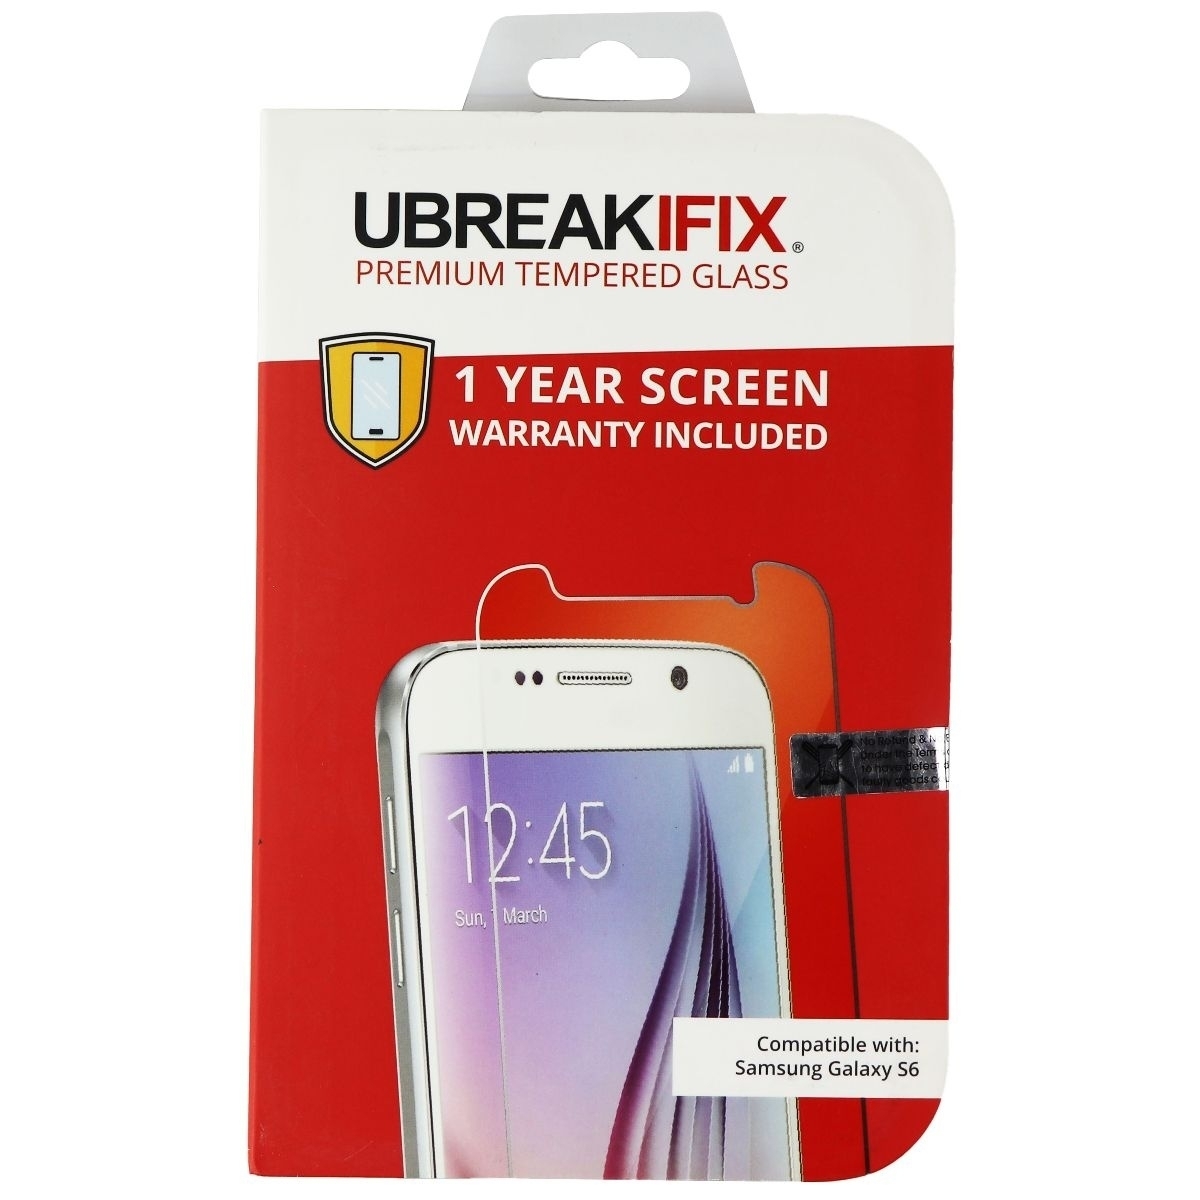 UBREAKIFIX Tempered Glass Screen Protector For Samsung Galaxy S6